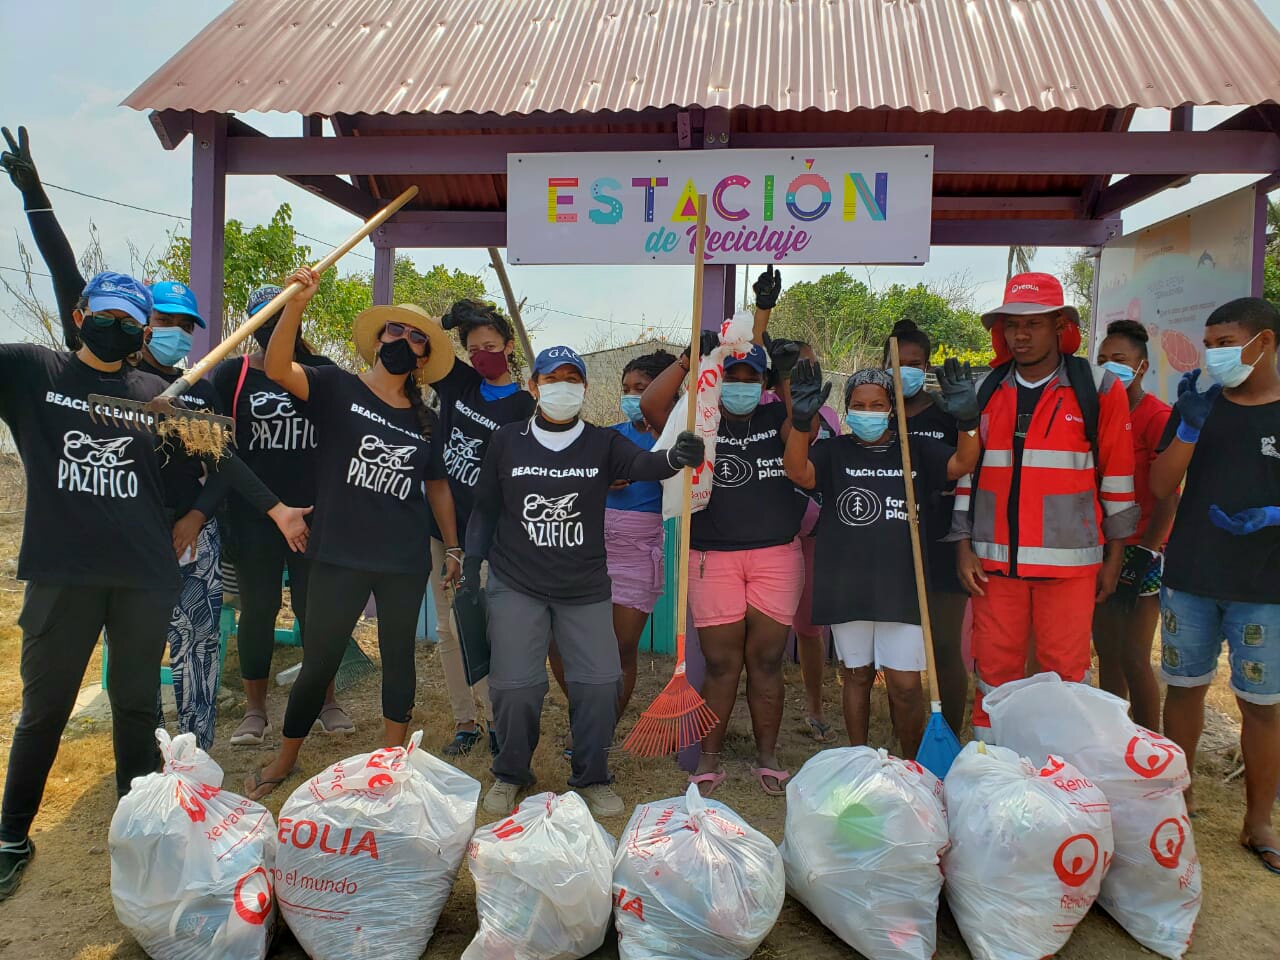 Beach clean up for the planet